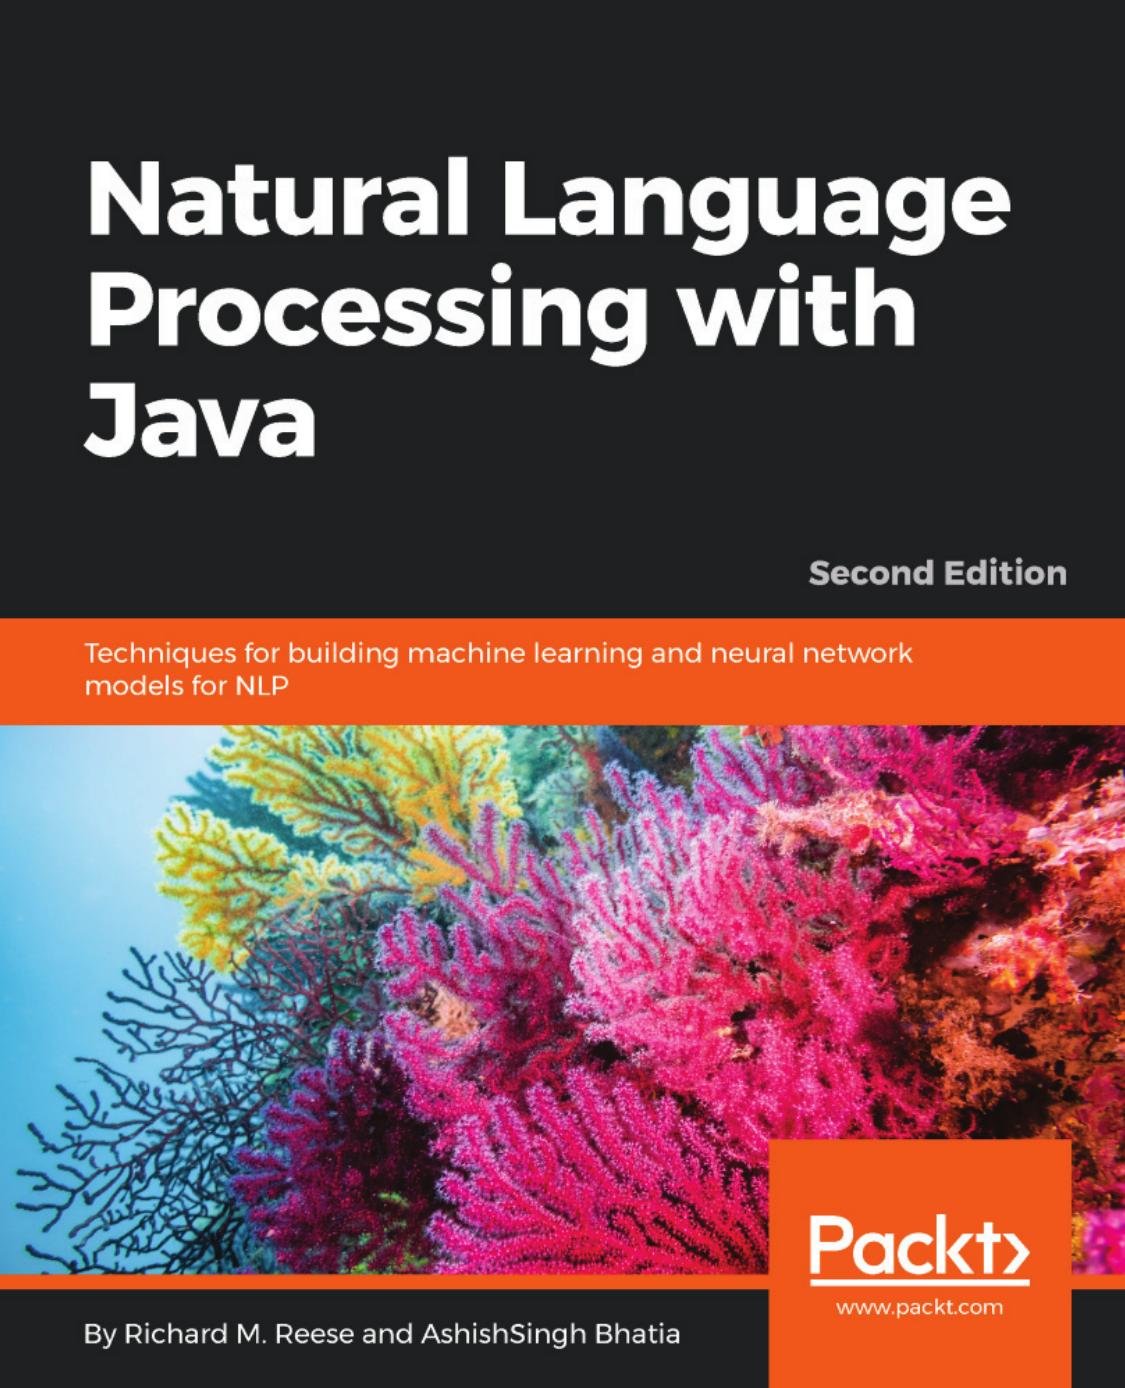 Natural Language Processing With Java: Techniques for Building Machine Learning and Neural Network Models for NLP, 2nd Edition